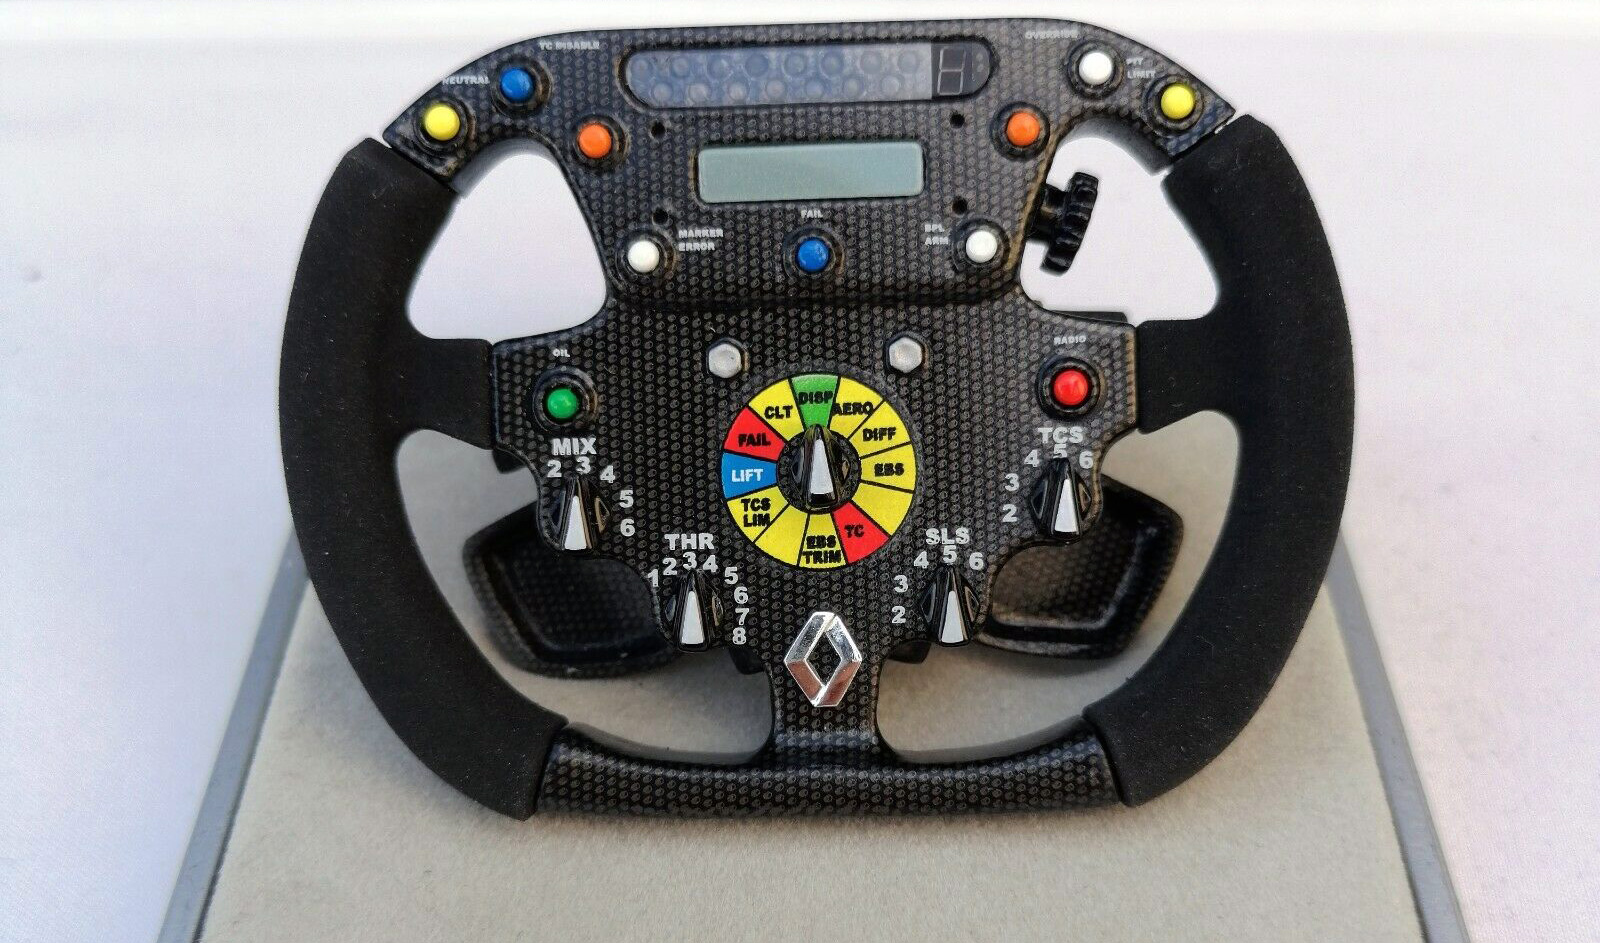 You can find a genuine F1 steering wheel on eBay.